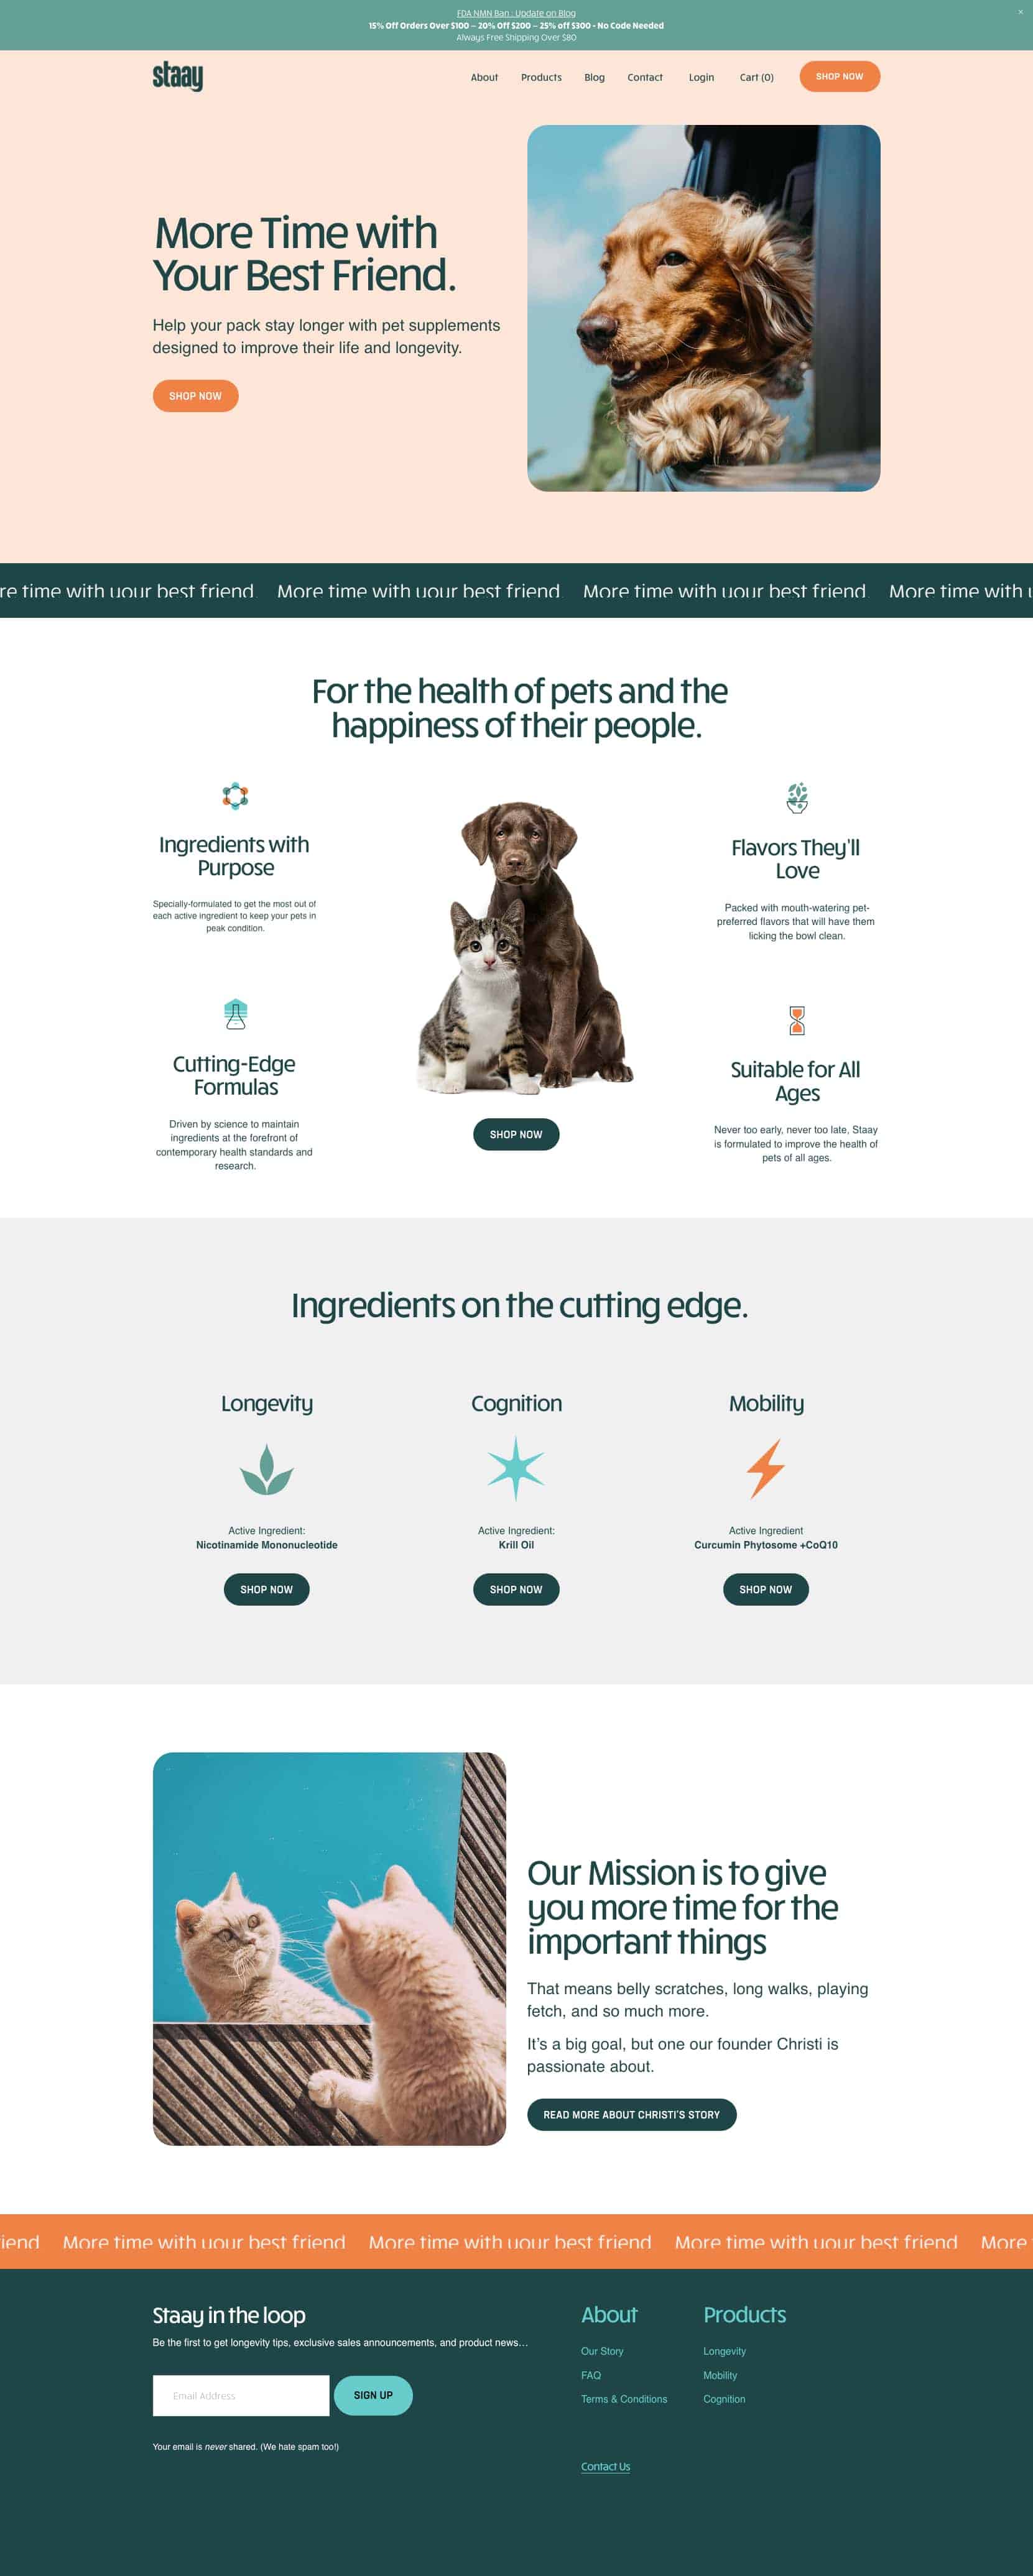 Squarespace Ecommerce Examples 8: Staay - Harmonious Blend of Pet Charm and Navigational Simplicity